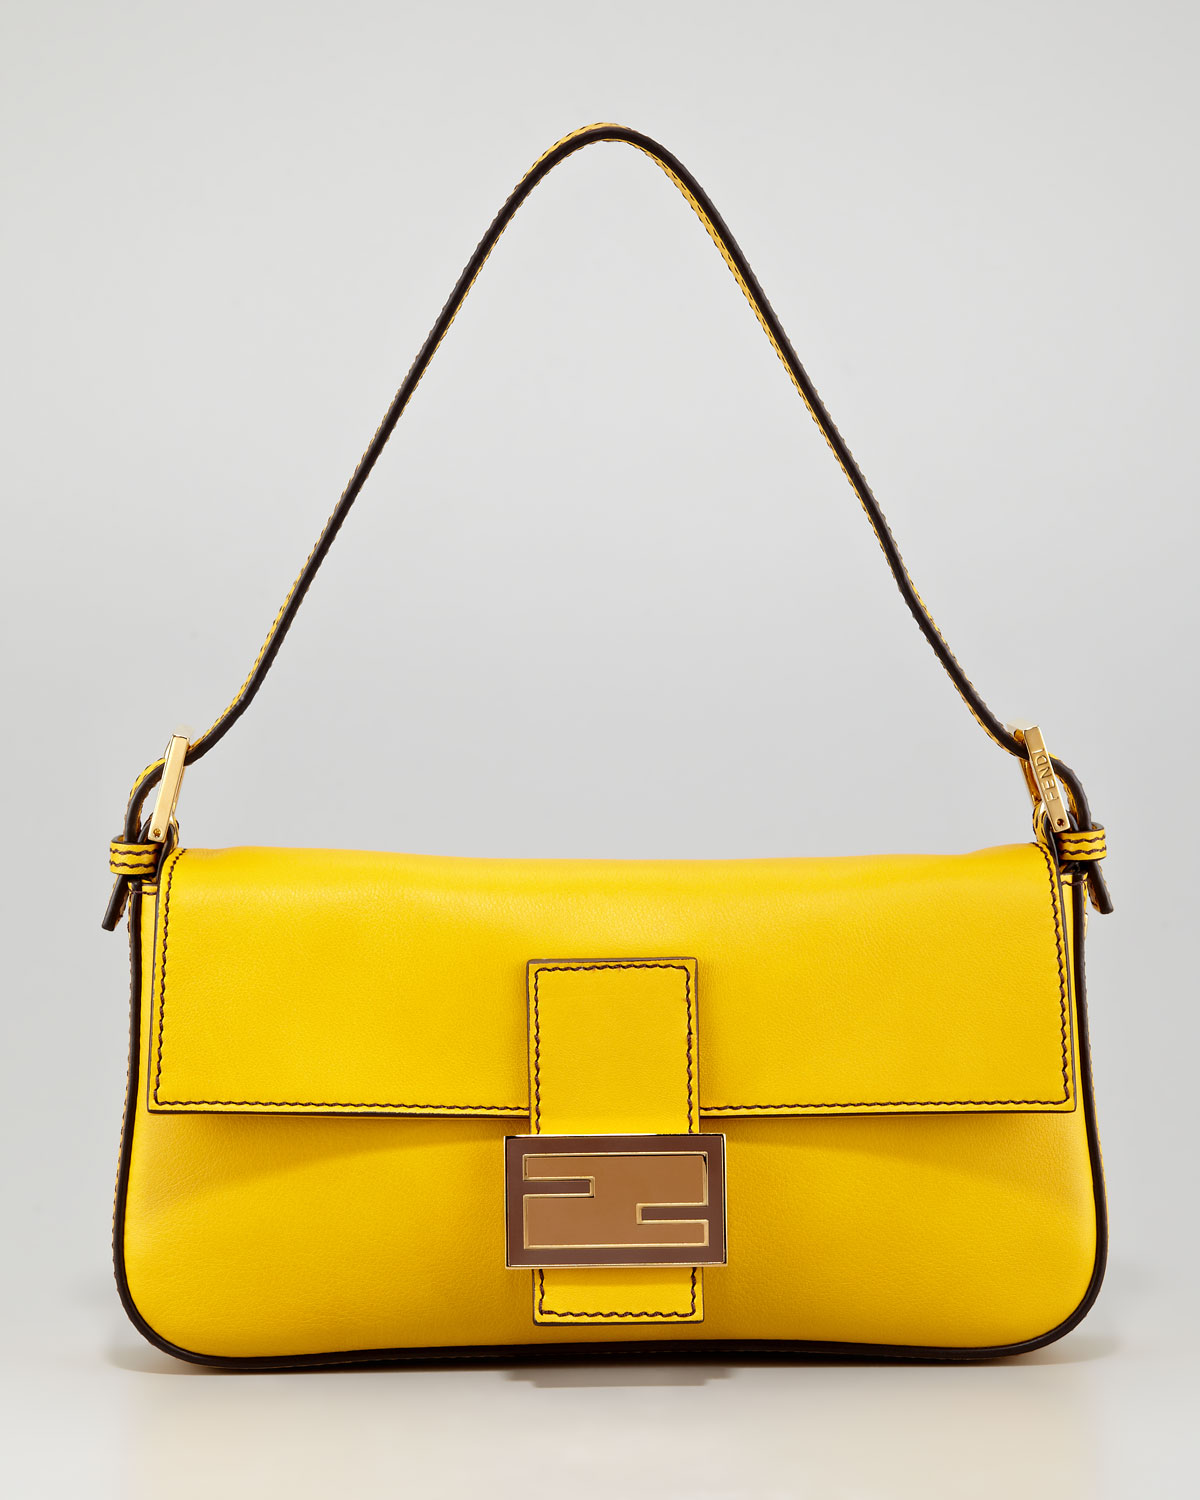 Fendi Leather Baguette Bag Chantilly in Yellow - Lyst